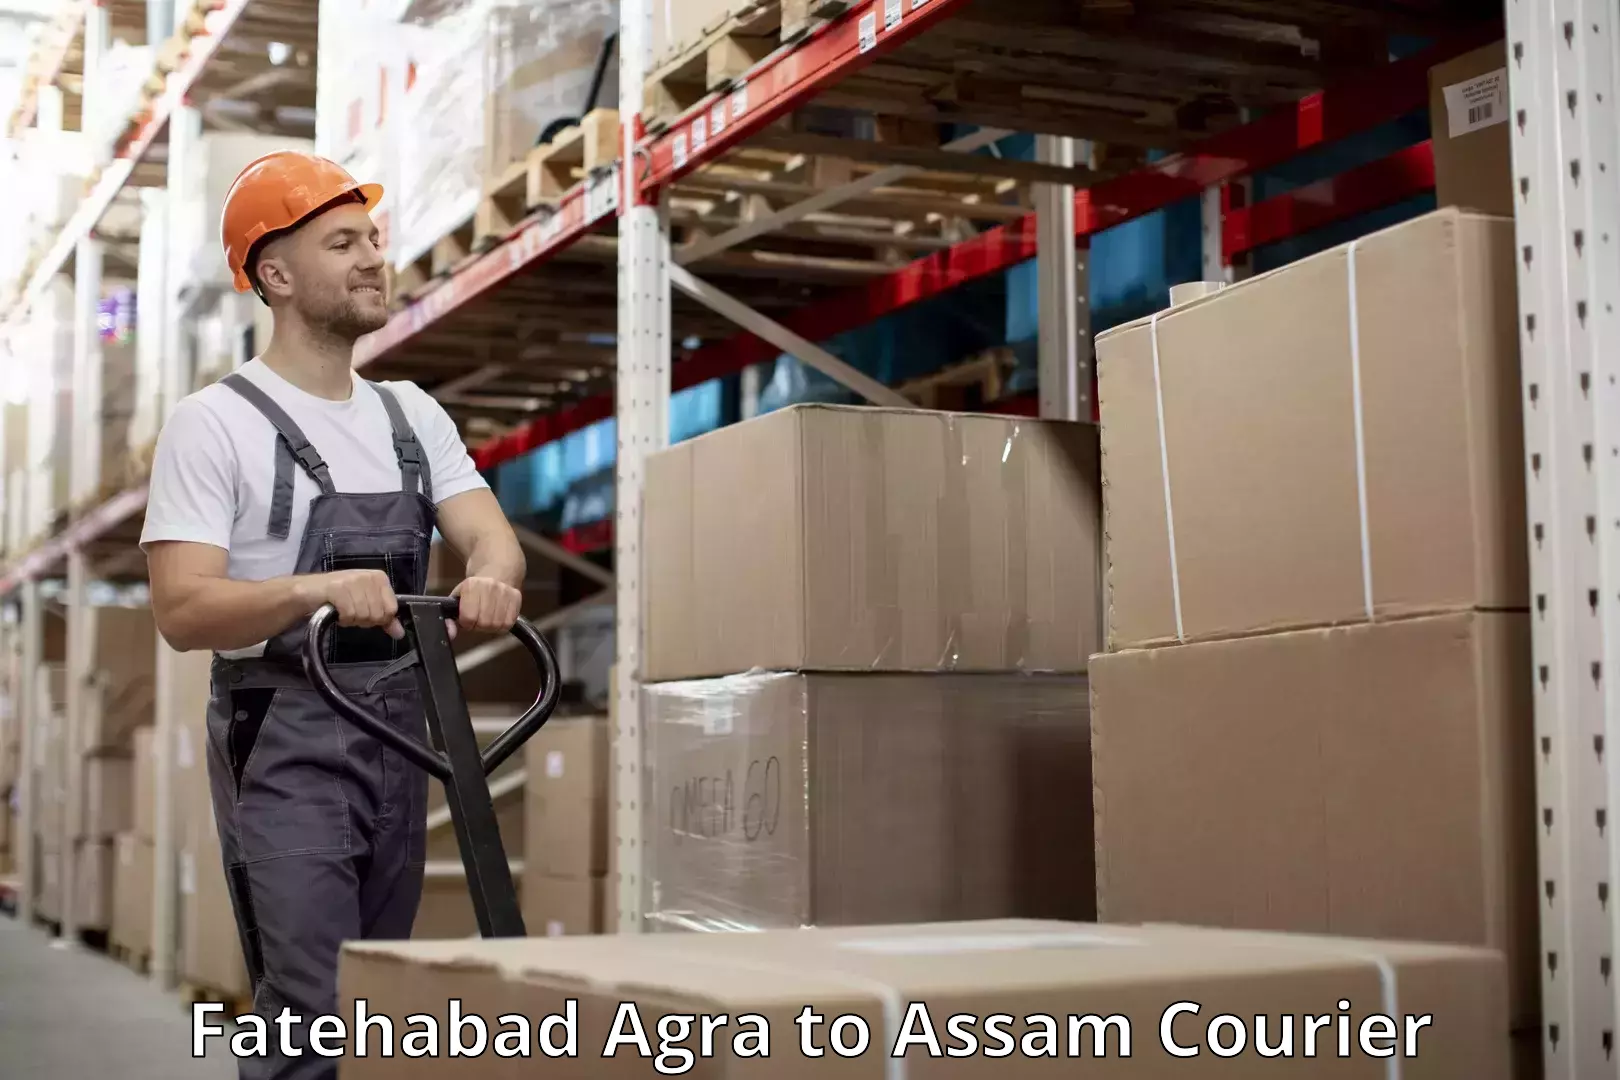 Luggage shipping service Fatehabad Agra to Assam